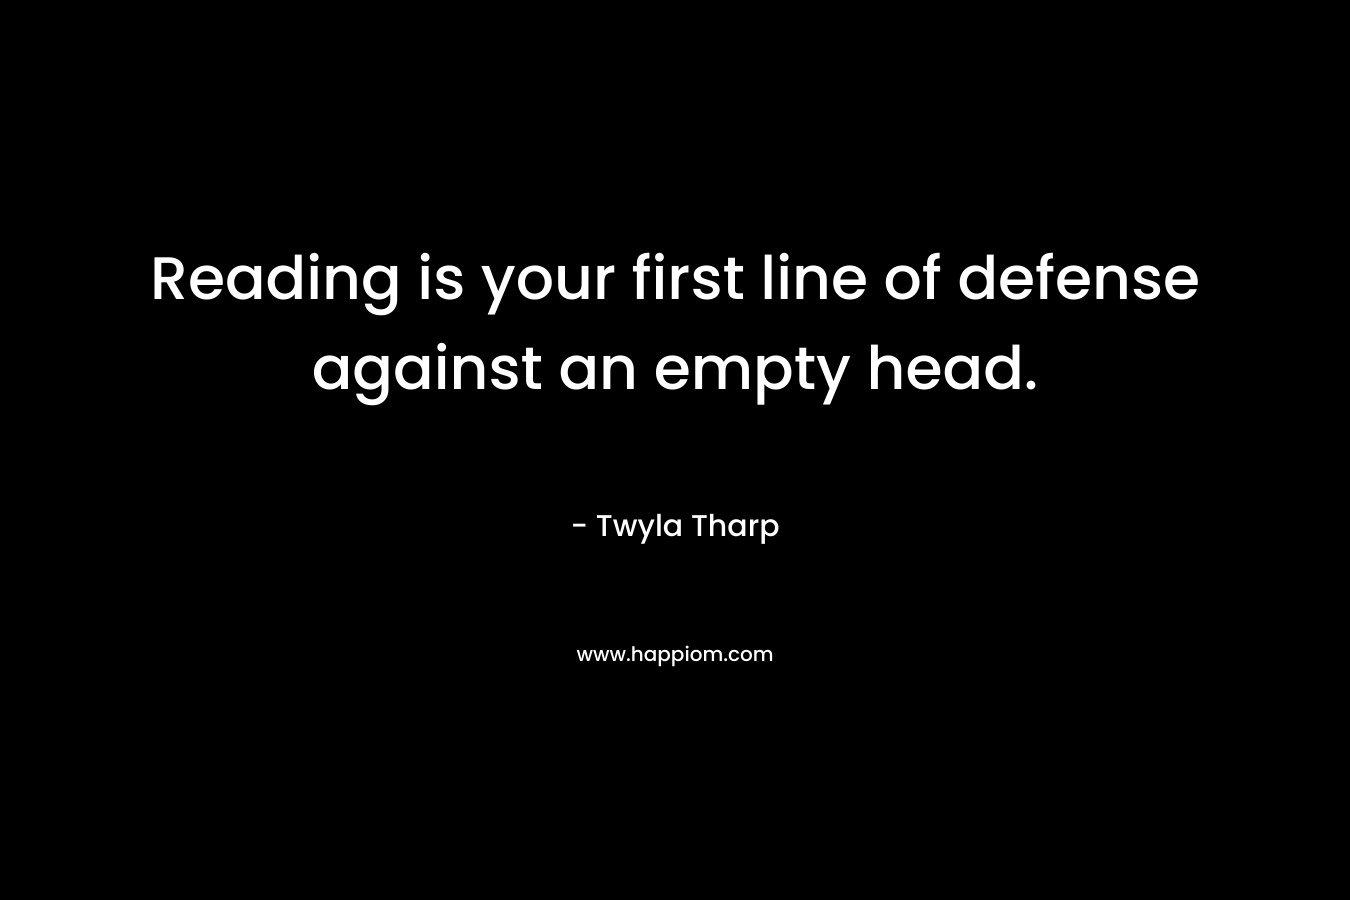 Reading is your first line of defense against an empty head.